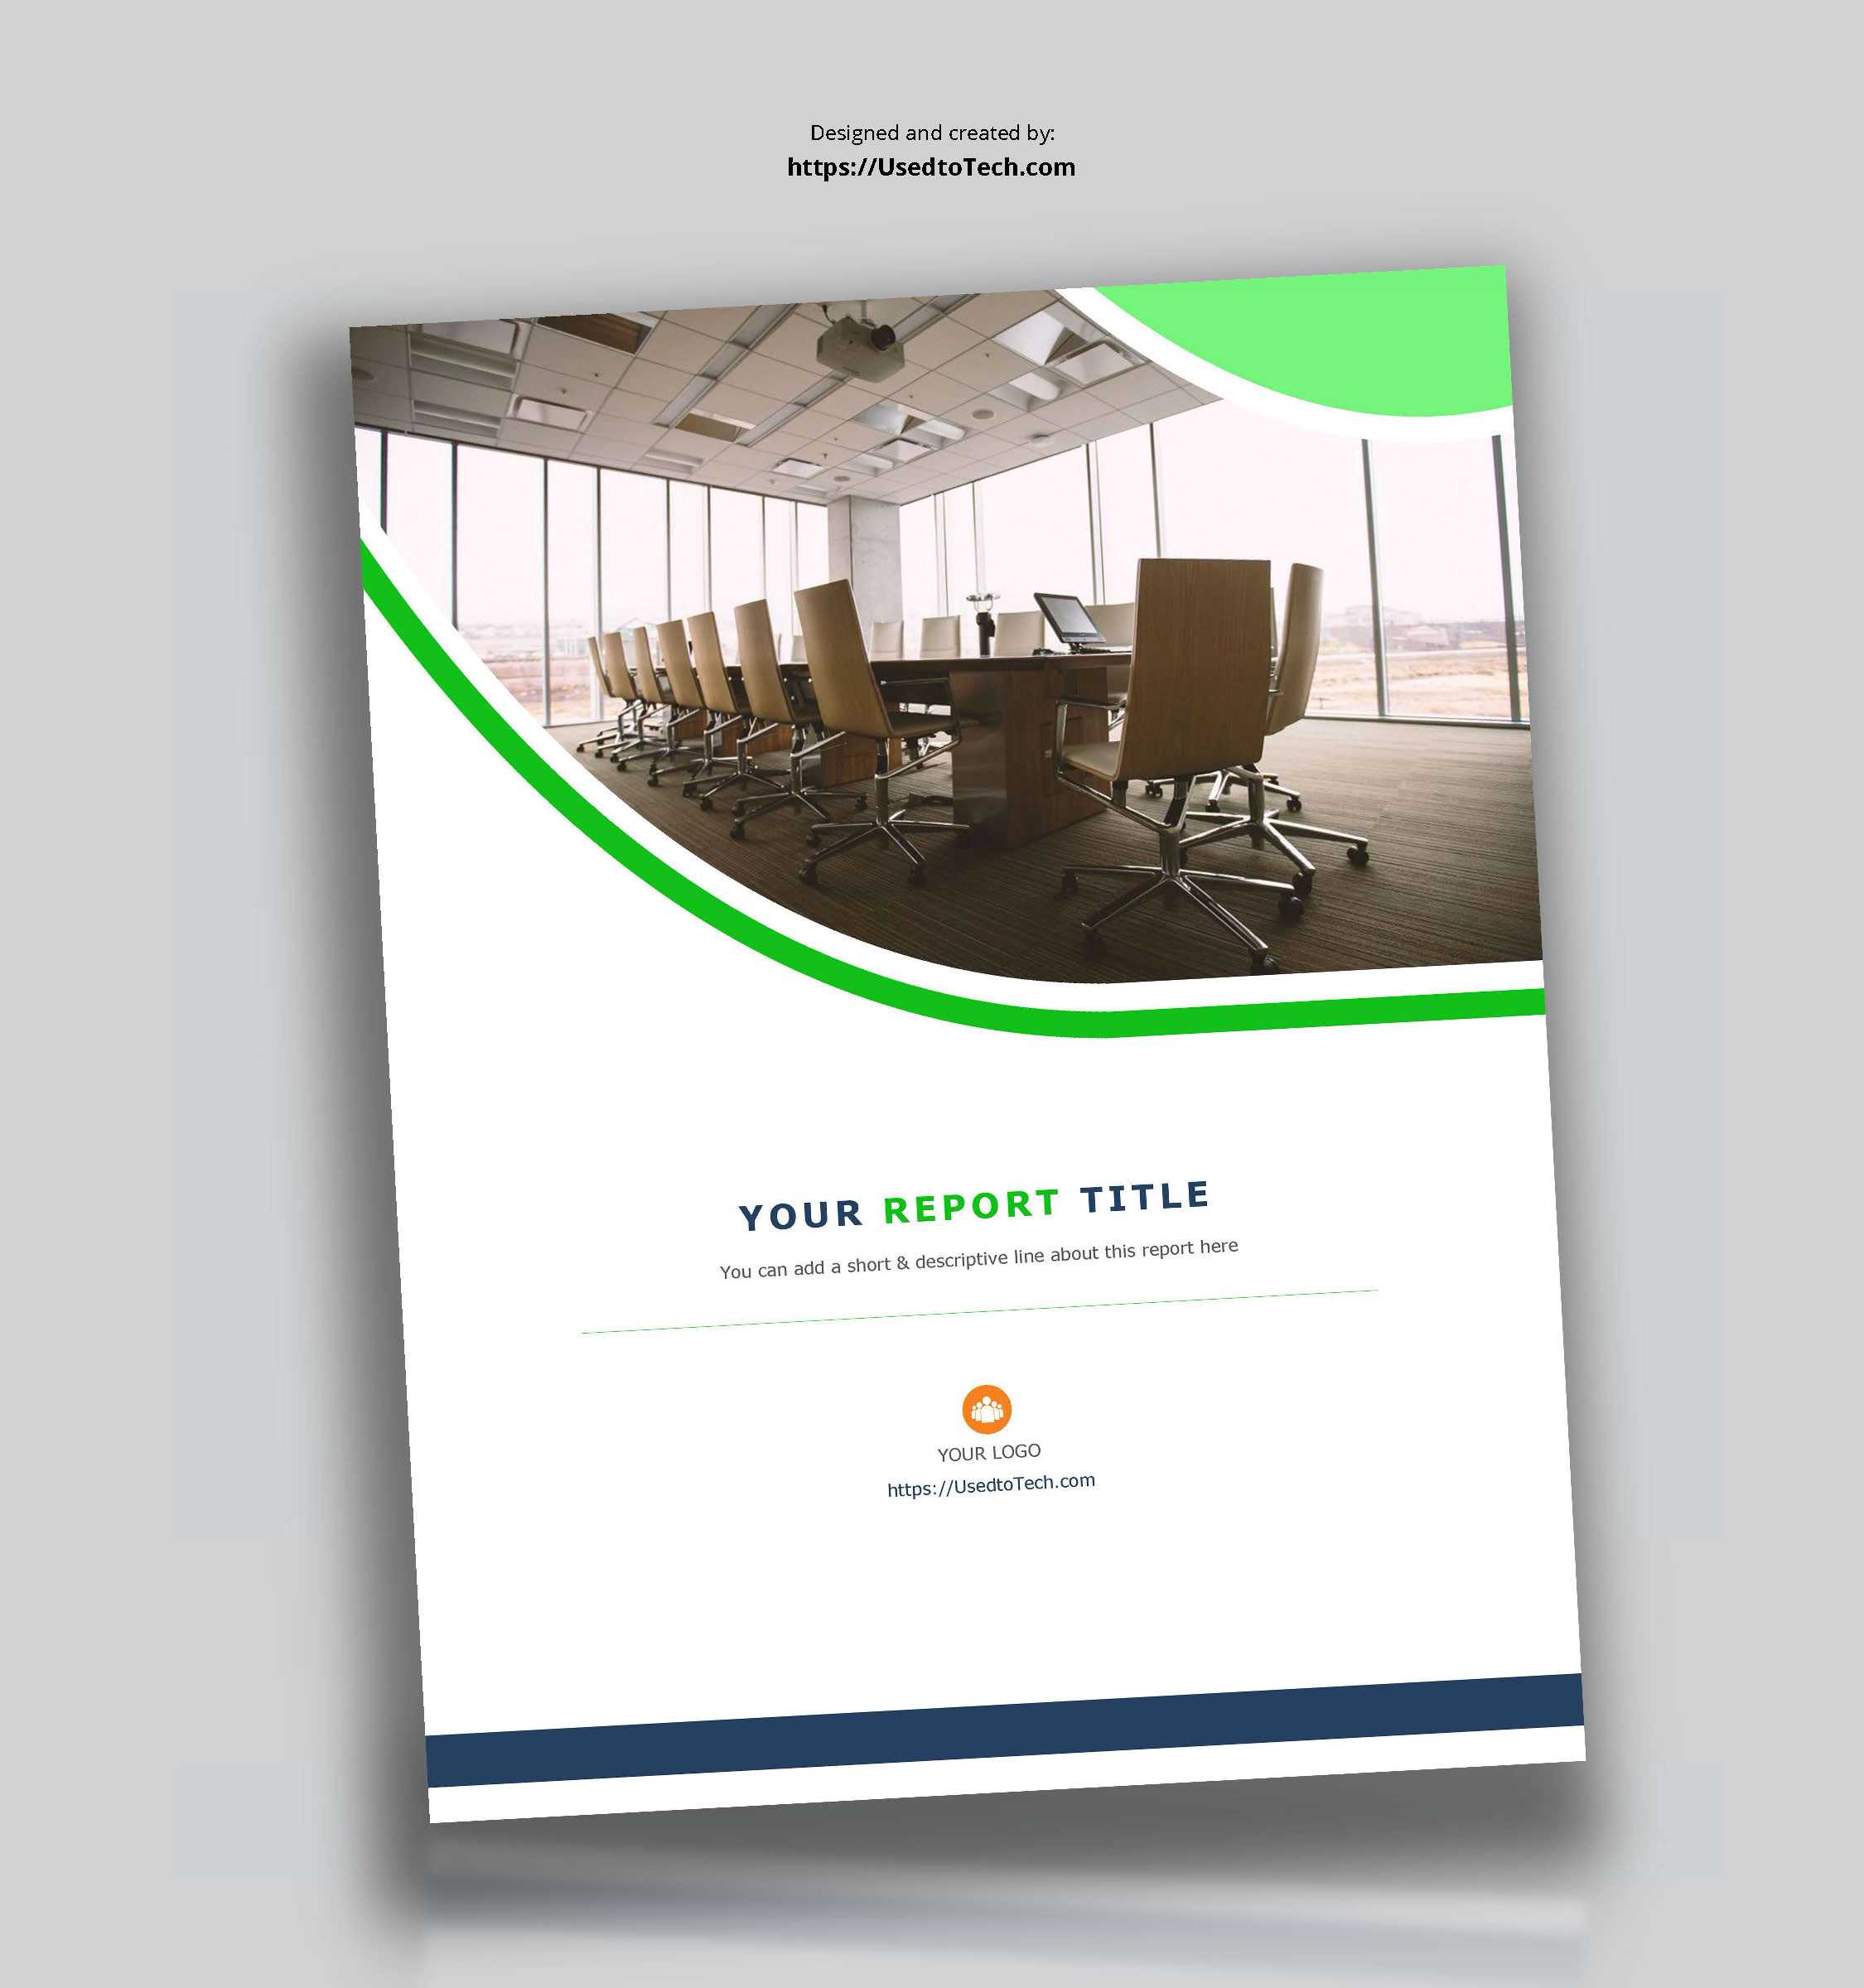 Corporate Report Design Template In Microsoft Word – Used To Throughout It Report Template For Word